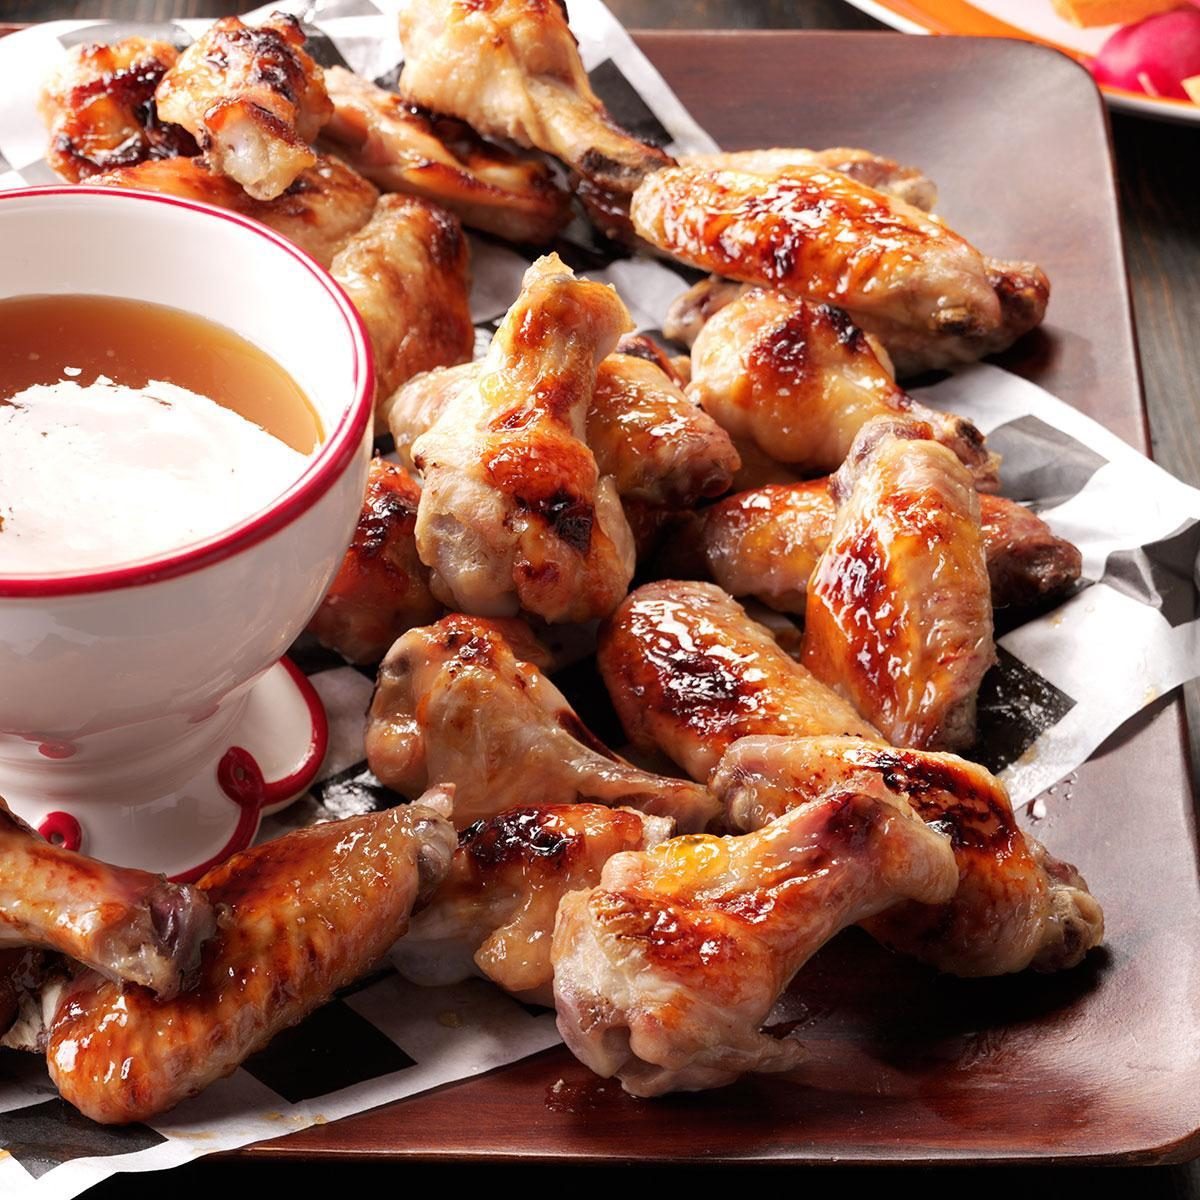 A platter of glazed chicken wings is served on a rectangular tray lined with paper. A small white bowl filled with dipping sauce sits on the tray, adding an appetizing touch to the dish.